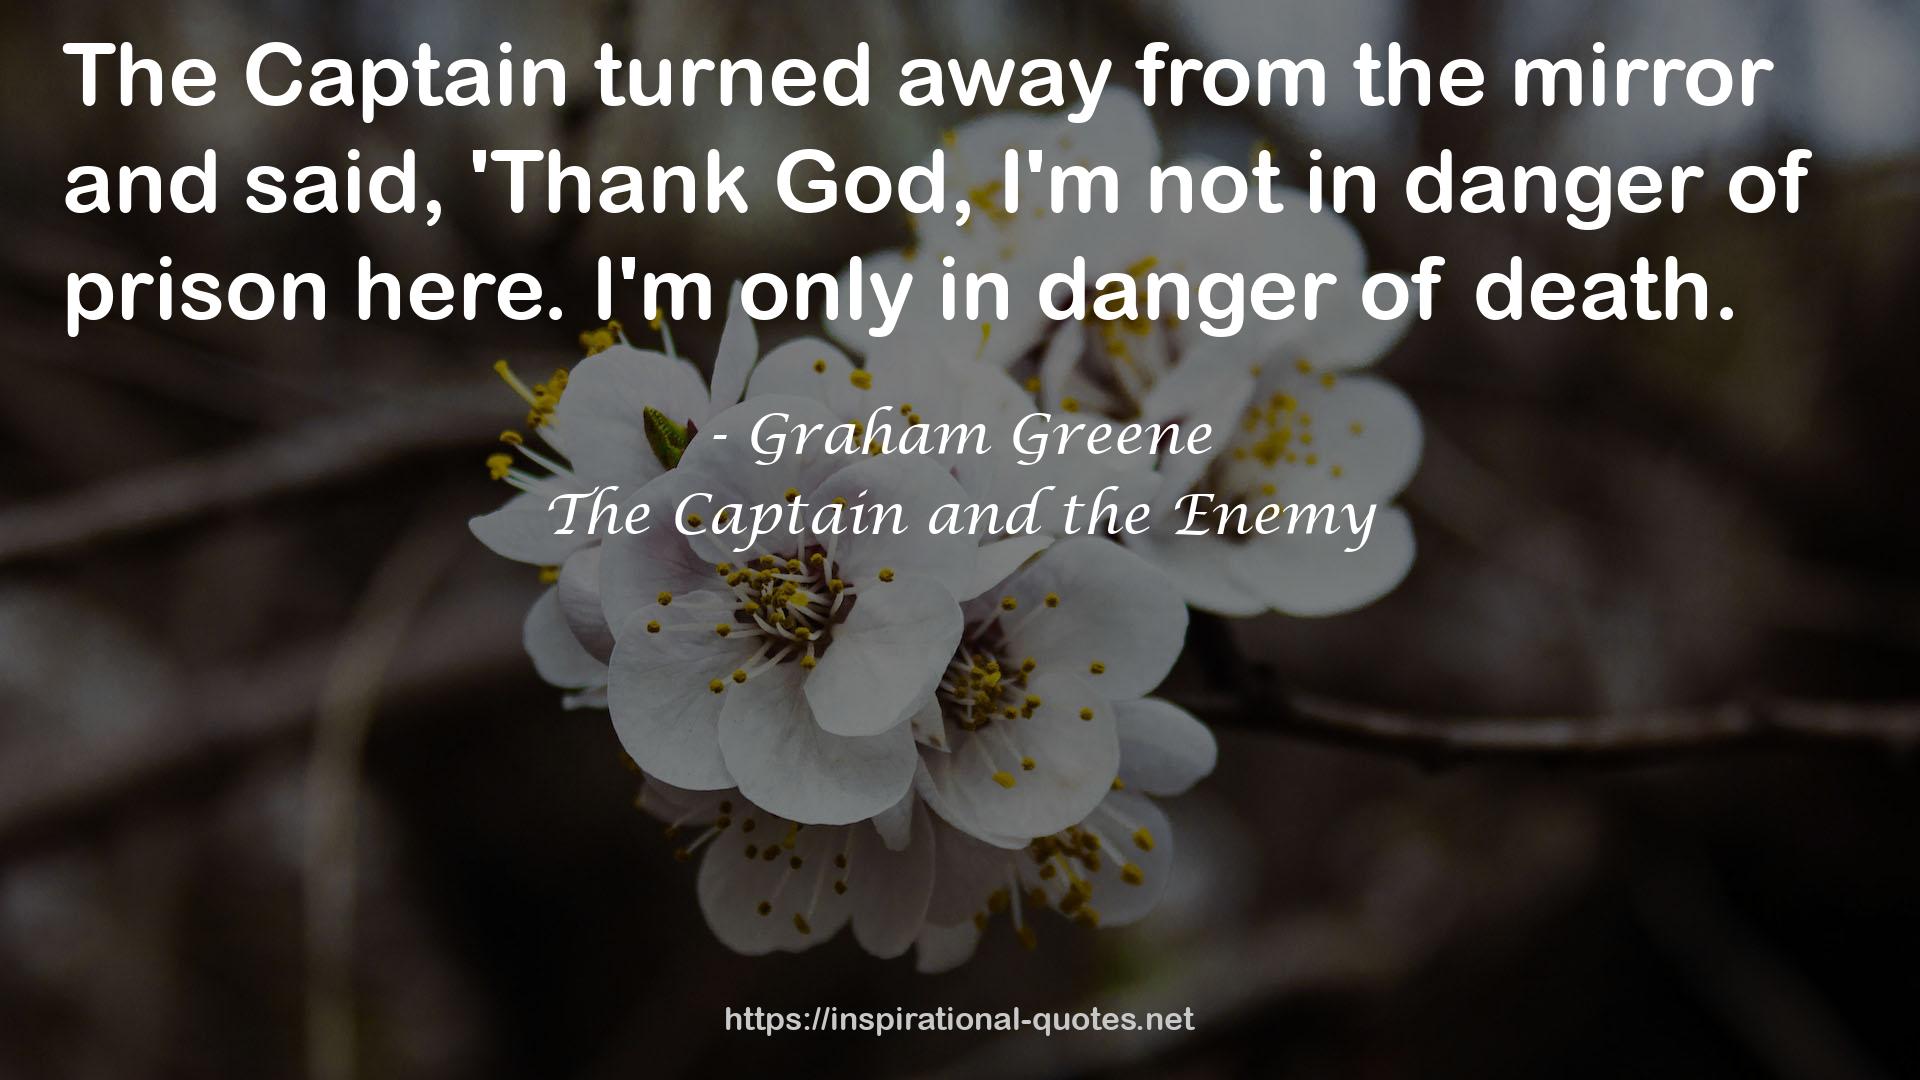 The Captain and the Enemy QUOTES